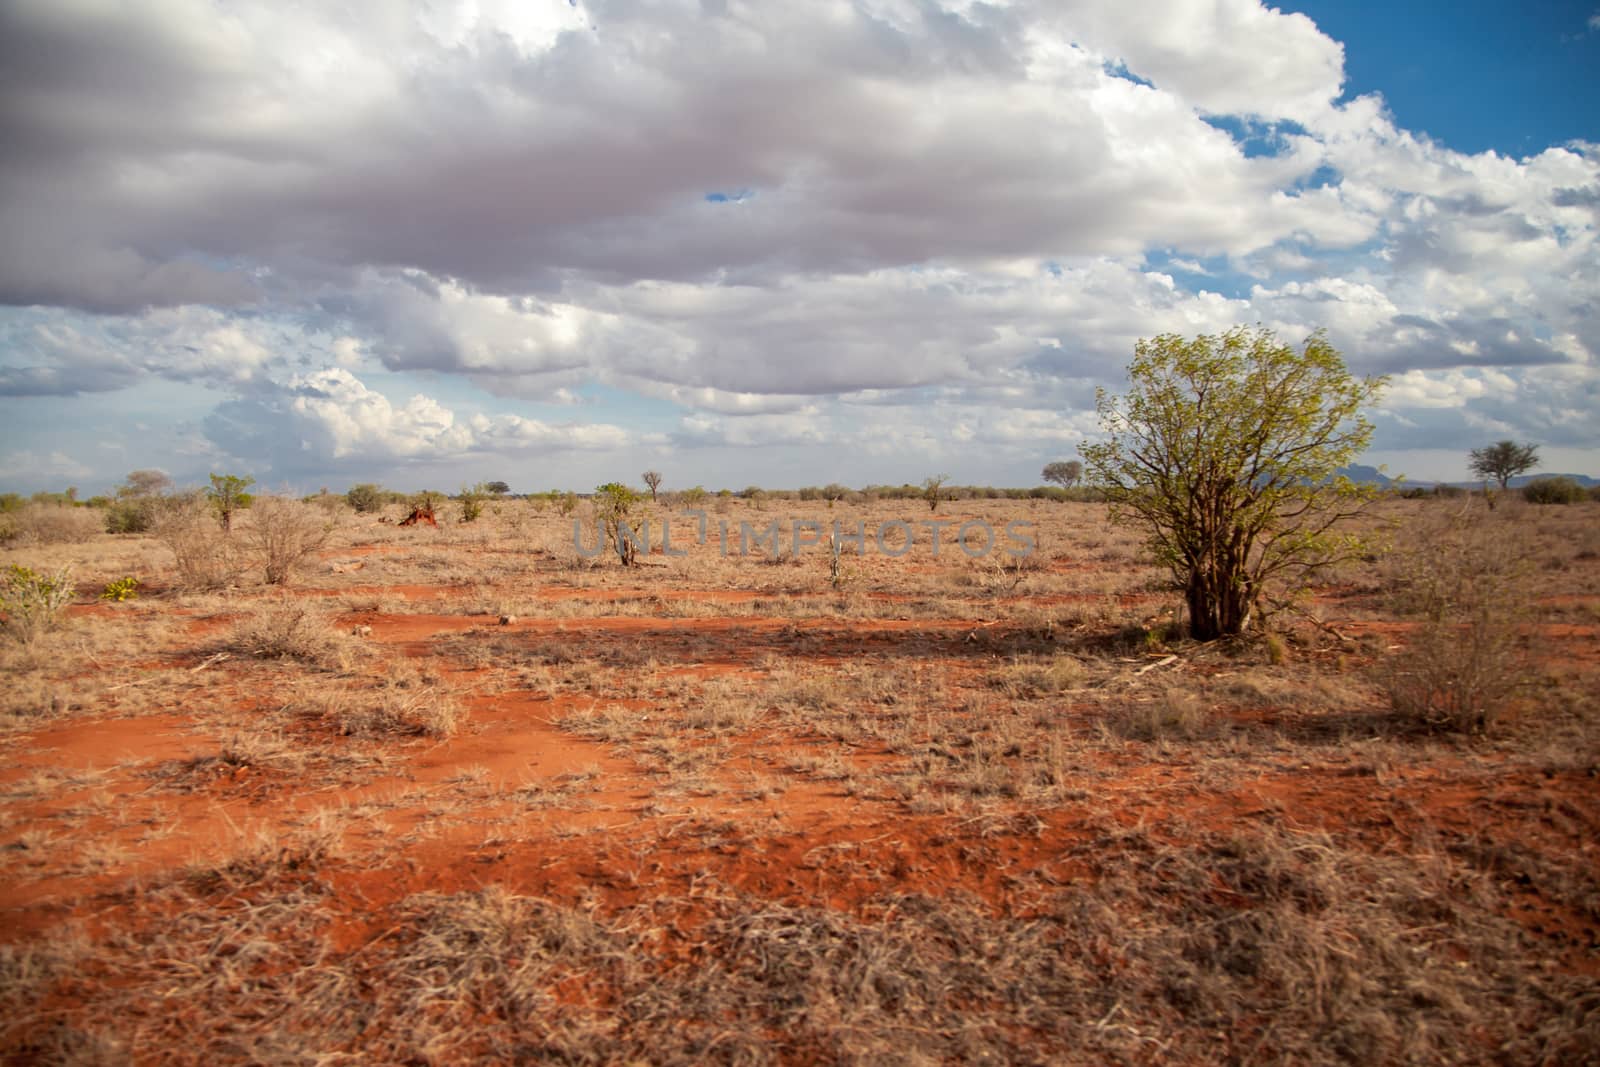 Scenery with red soil, trees, blue sky with white clouds, Kenya